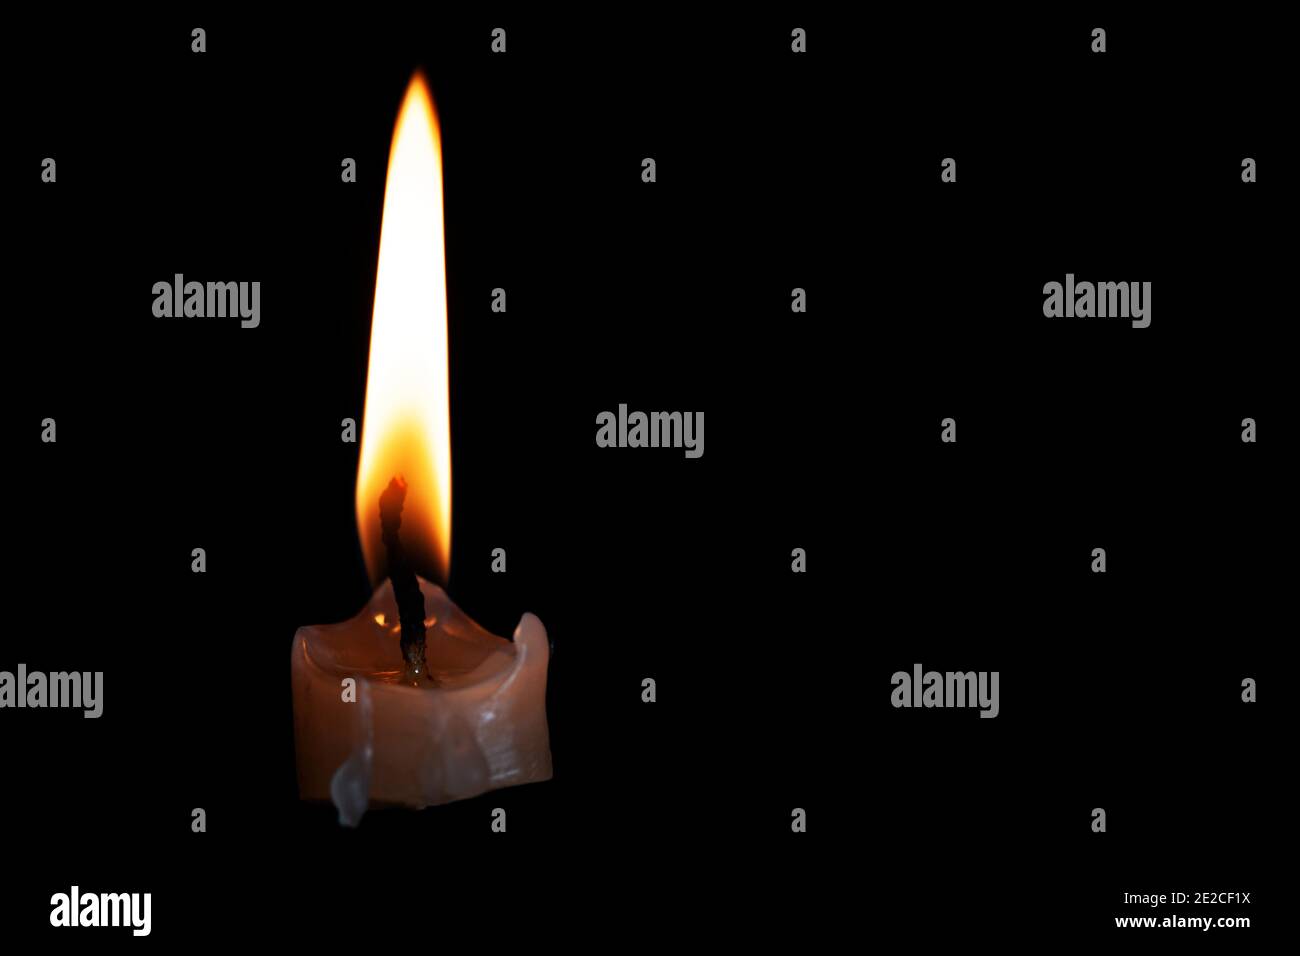 Light candle burning brightly in the black background Stock Photo